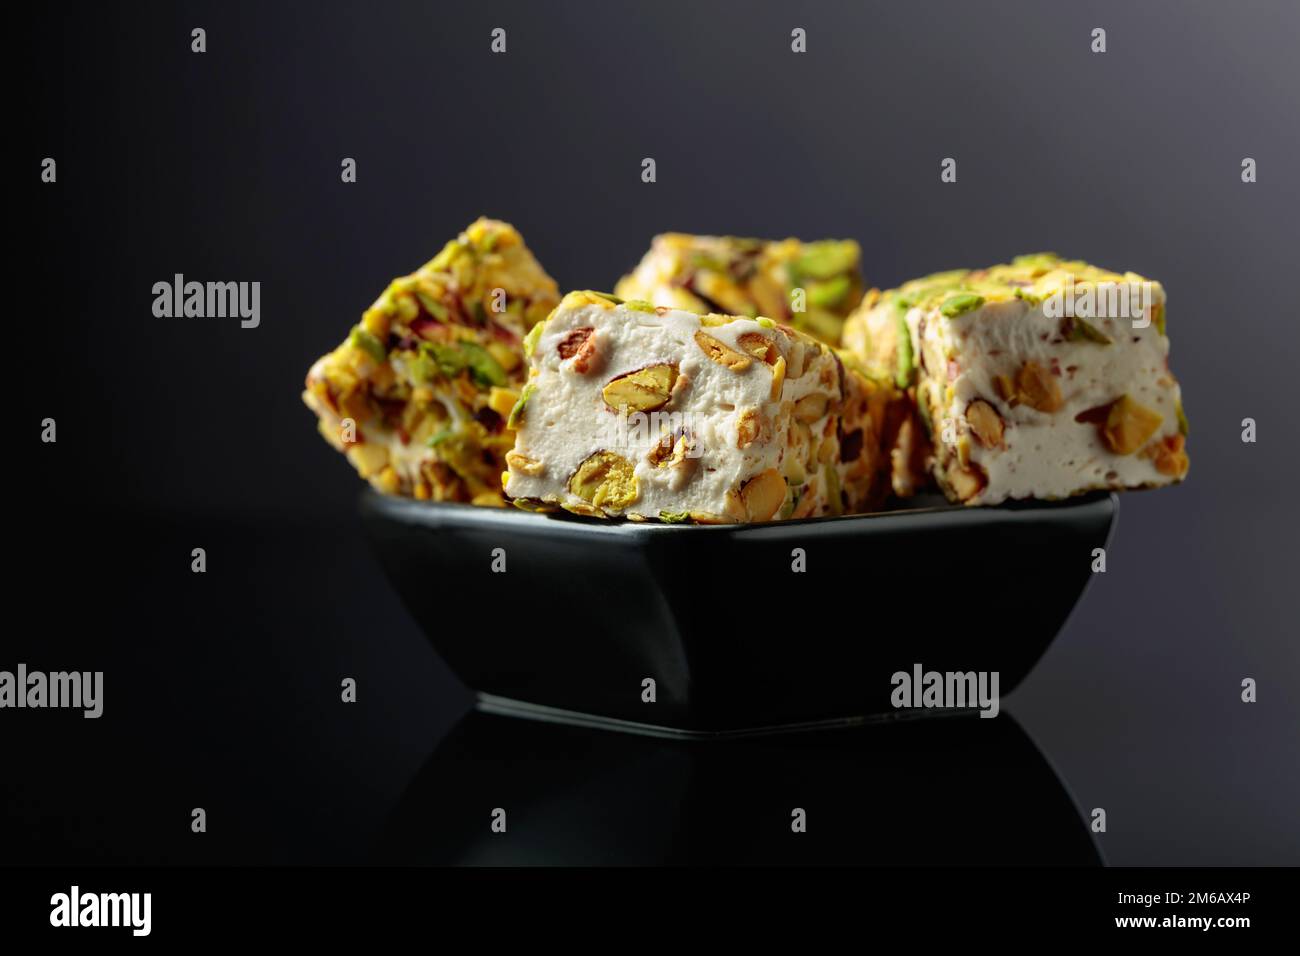 Traditional Turkish delight in a small black dish on a black reflective background. Stock Photo